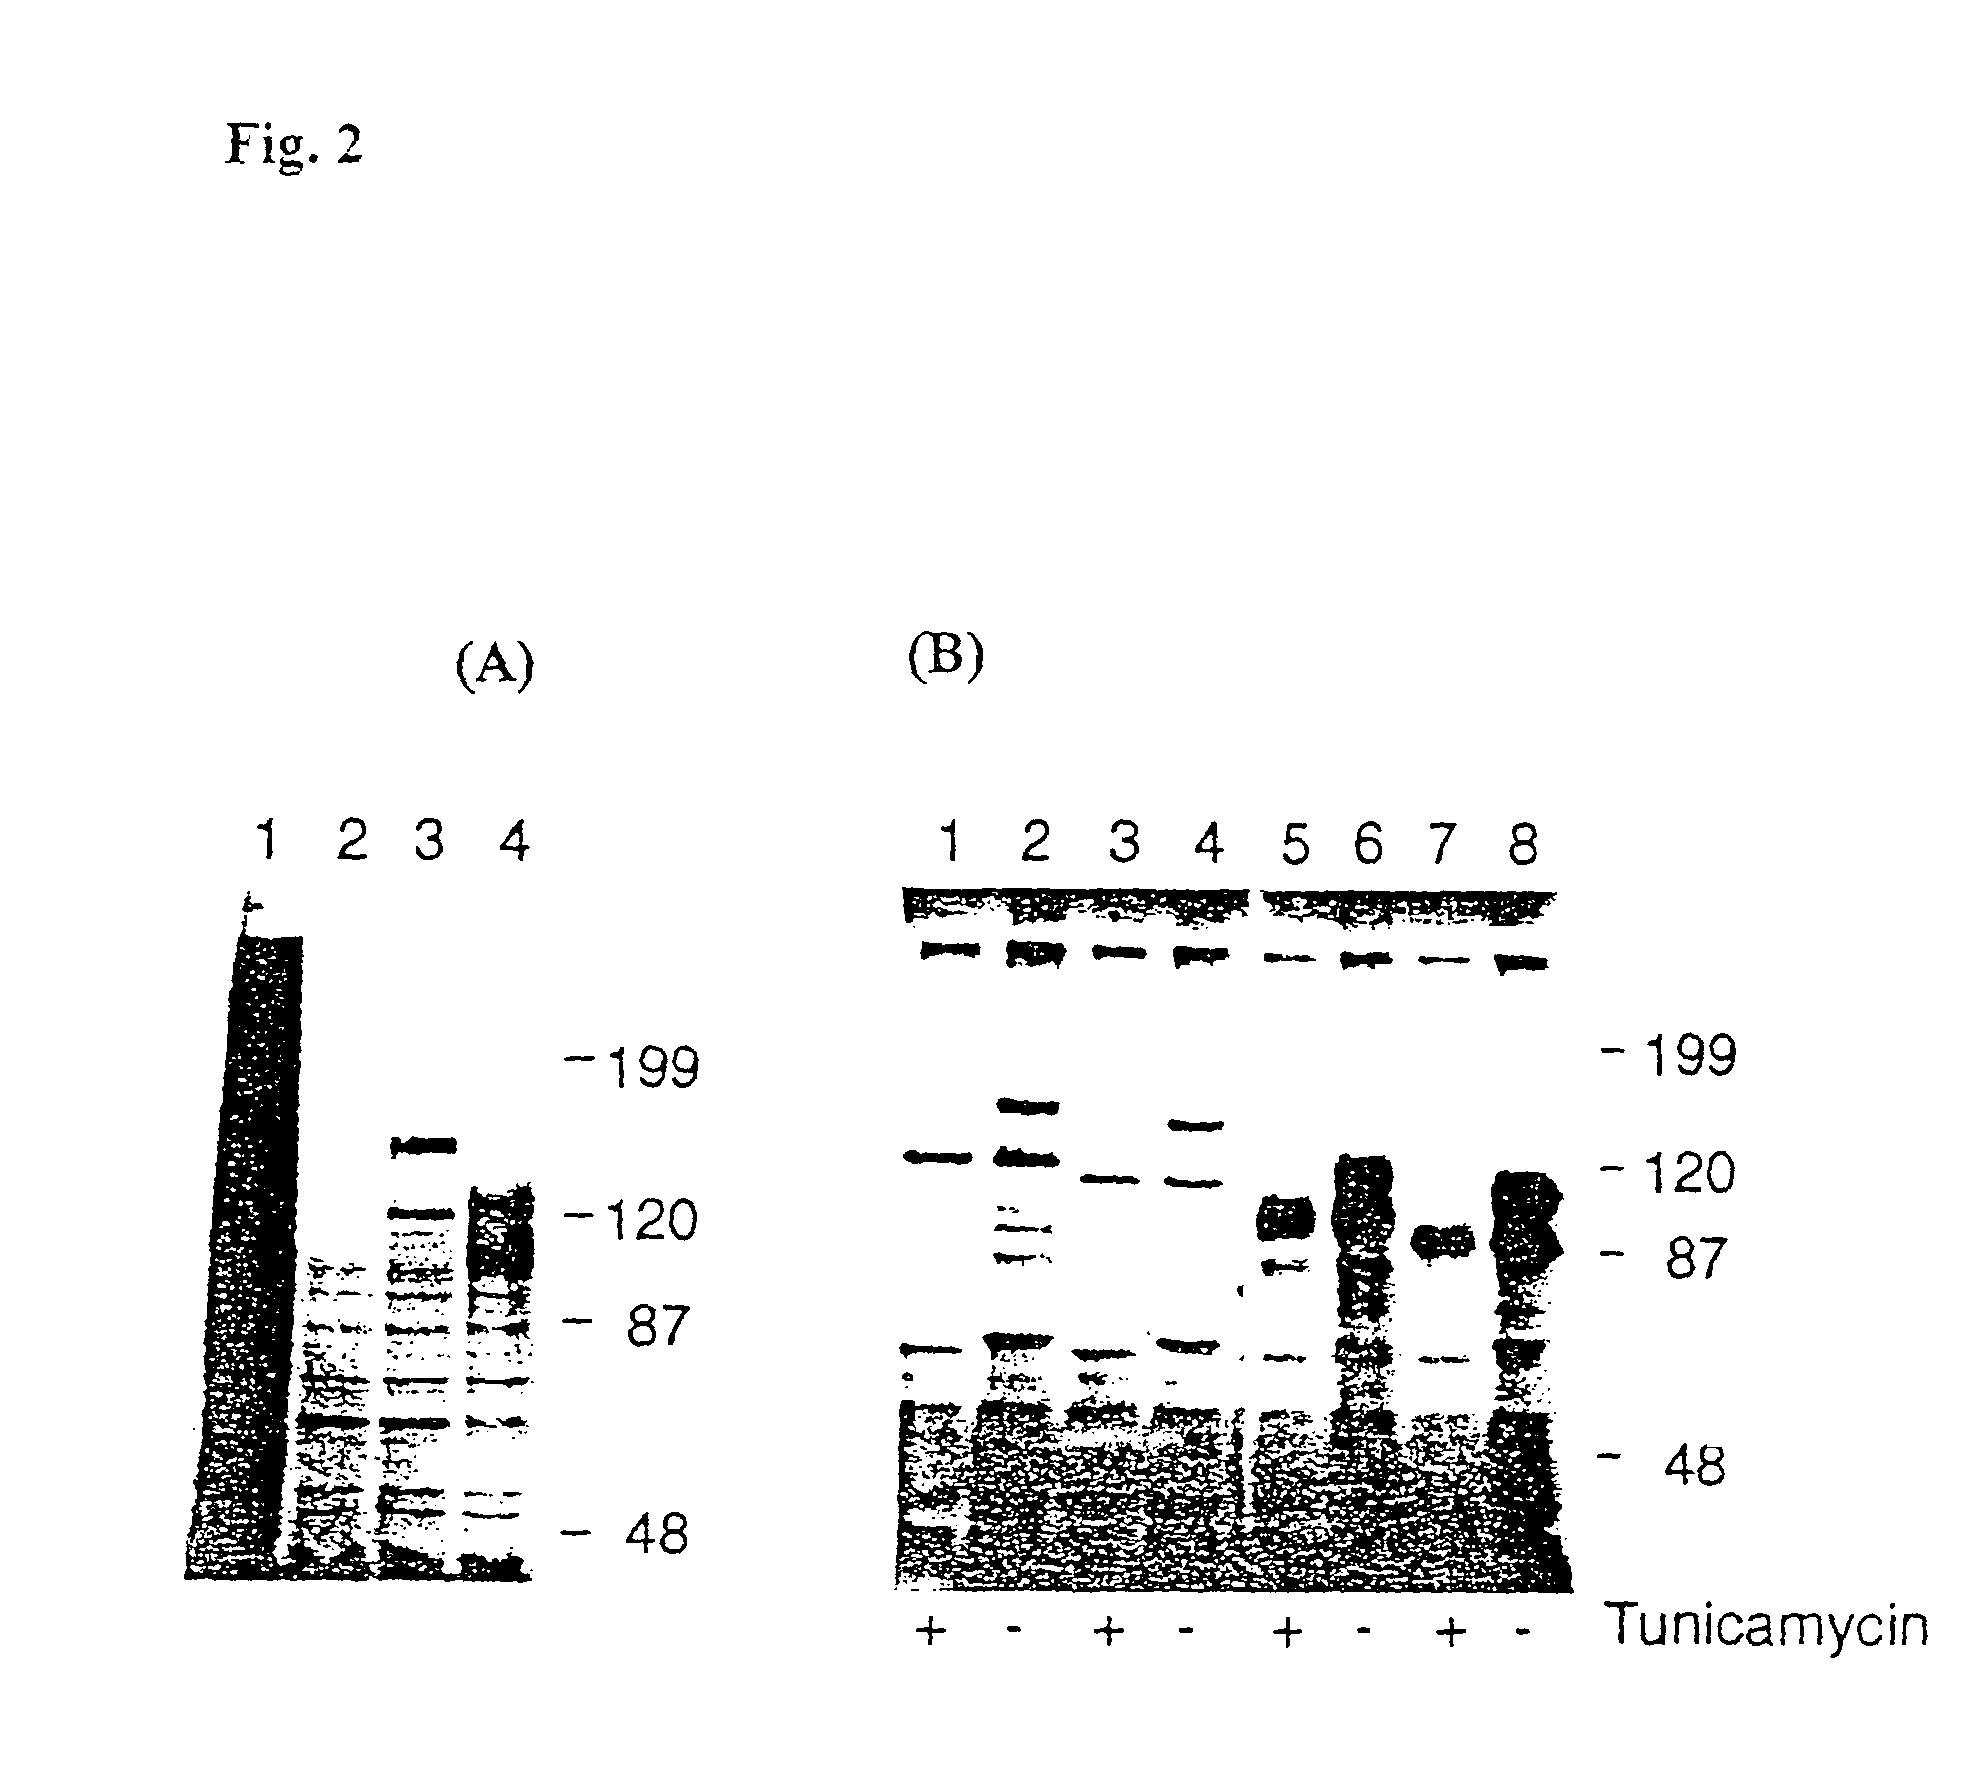 Soluble recombinant αvβ3 adhesion receptor